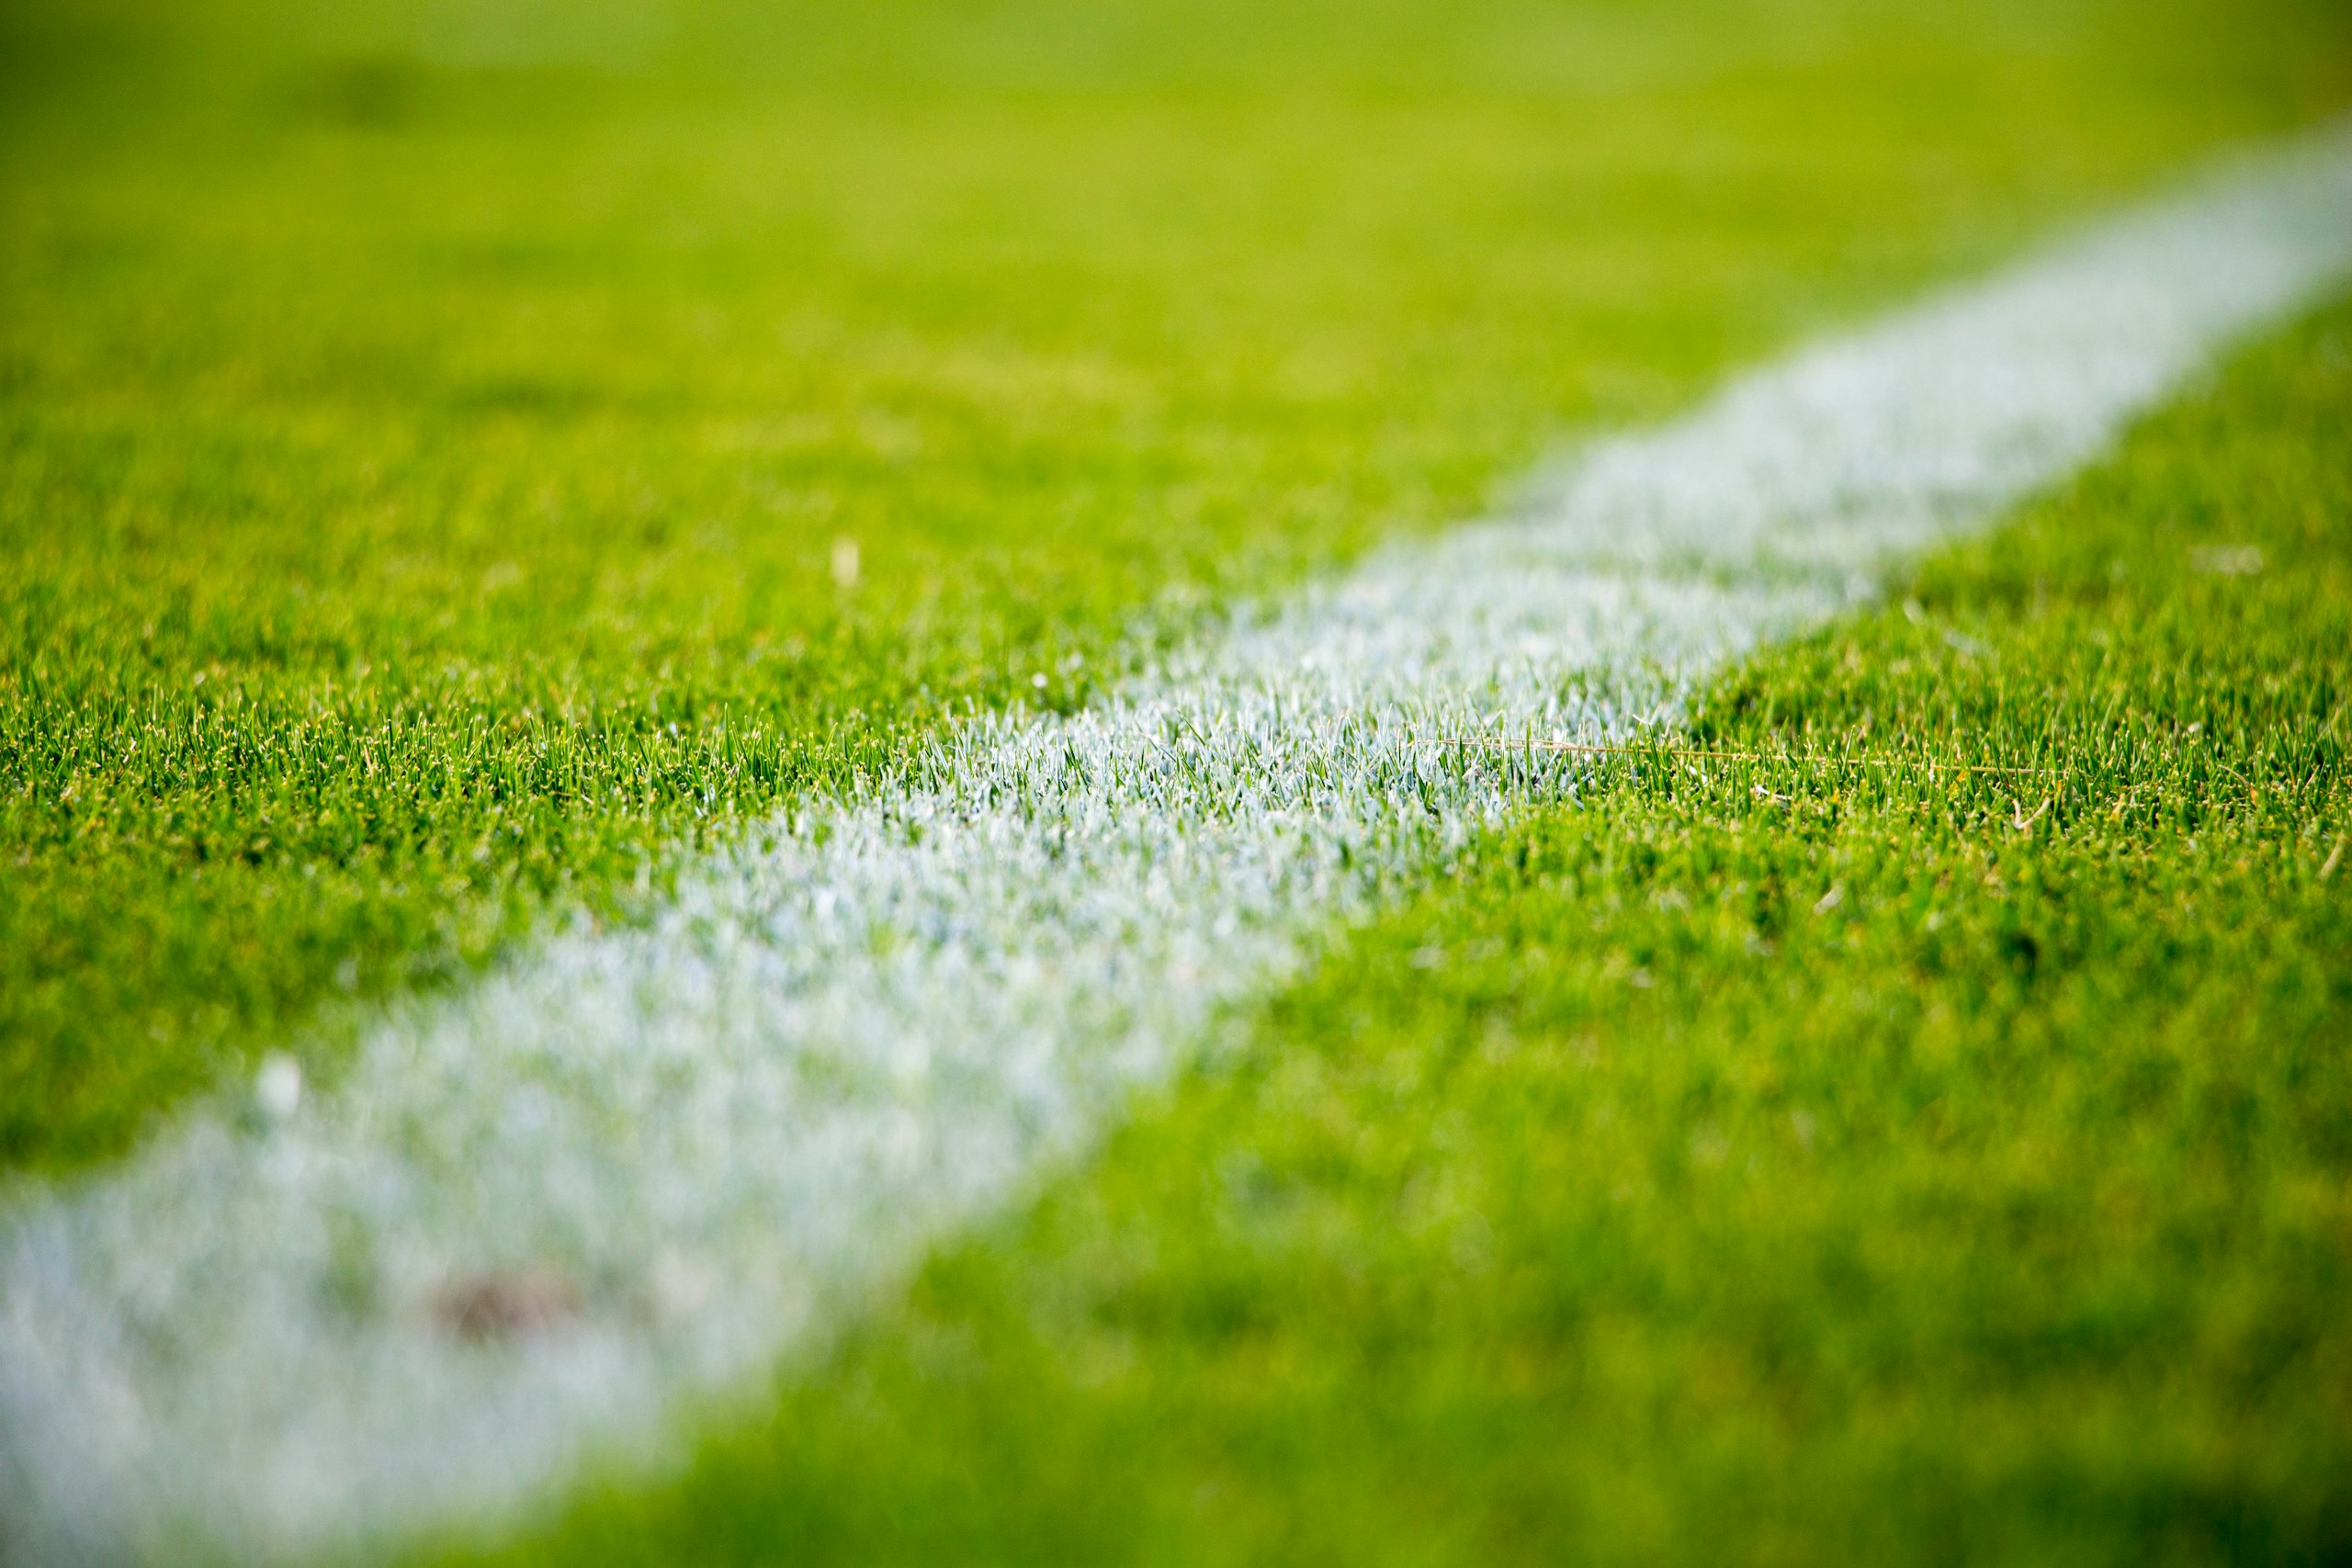 Giants, football, Close-up of a white line on green grass in a soccer field